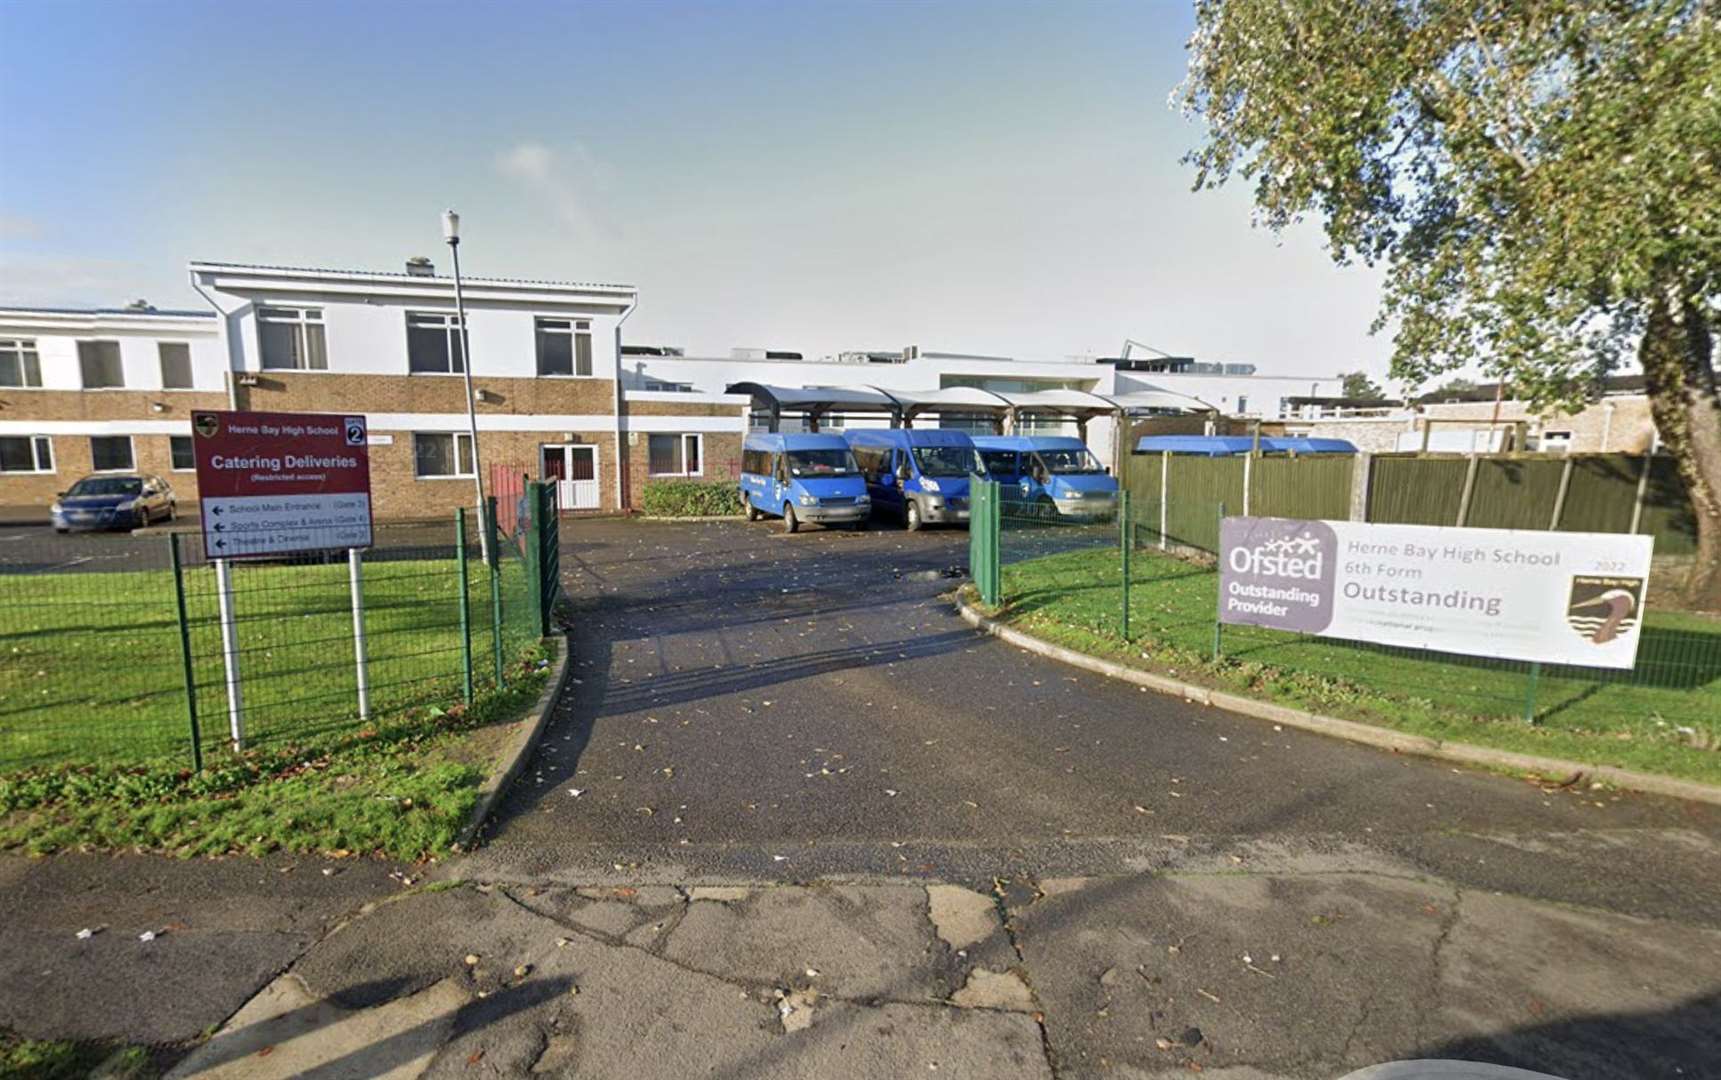 A pupil from Herne Bay High School collapsed after taking a puff from a vape that had been laced with a synthetic drug